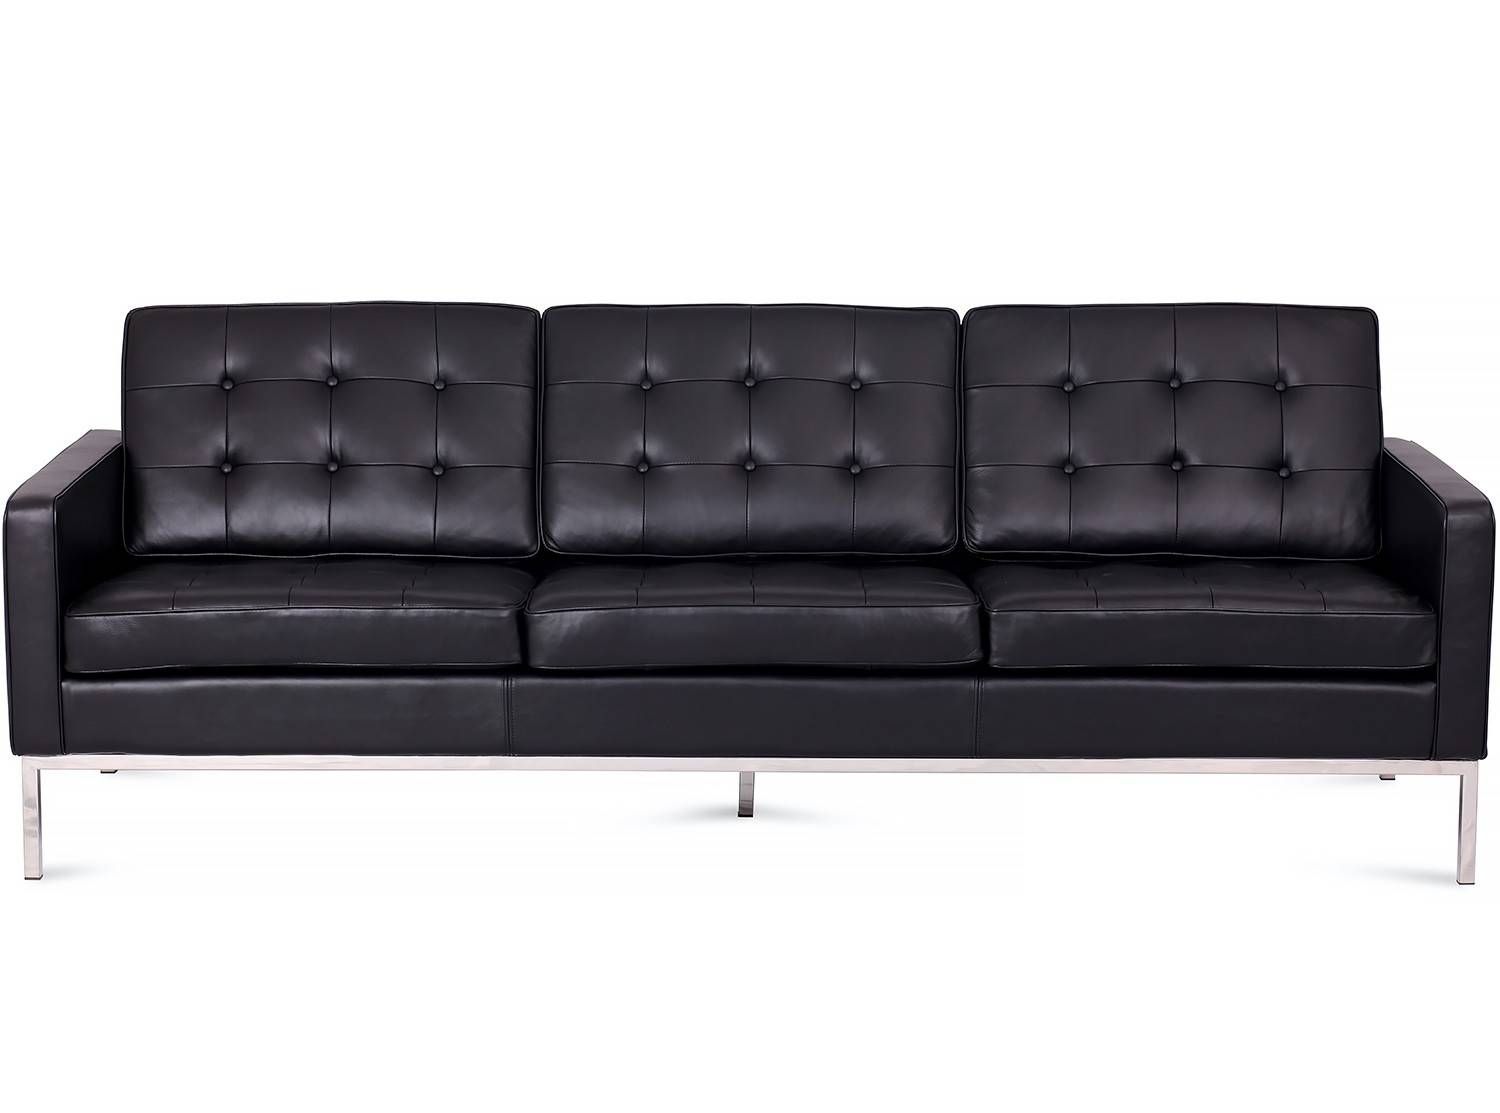 Sofas Center : Florence Knoll Sofa Comfort Chaise Reproduction Throughout Florence Medium Sofas (View 15 of 25)